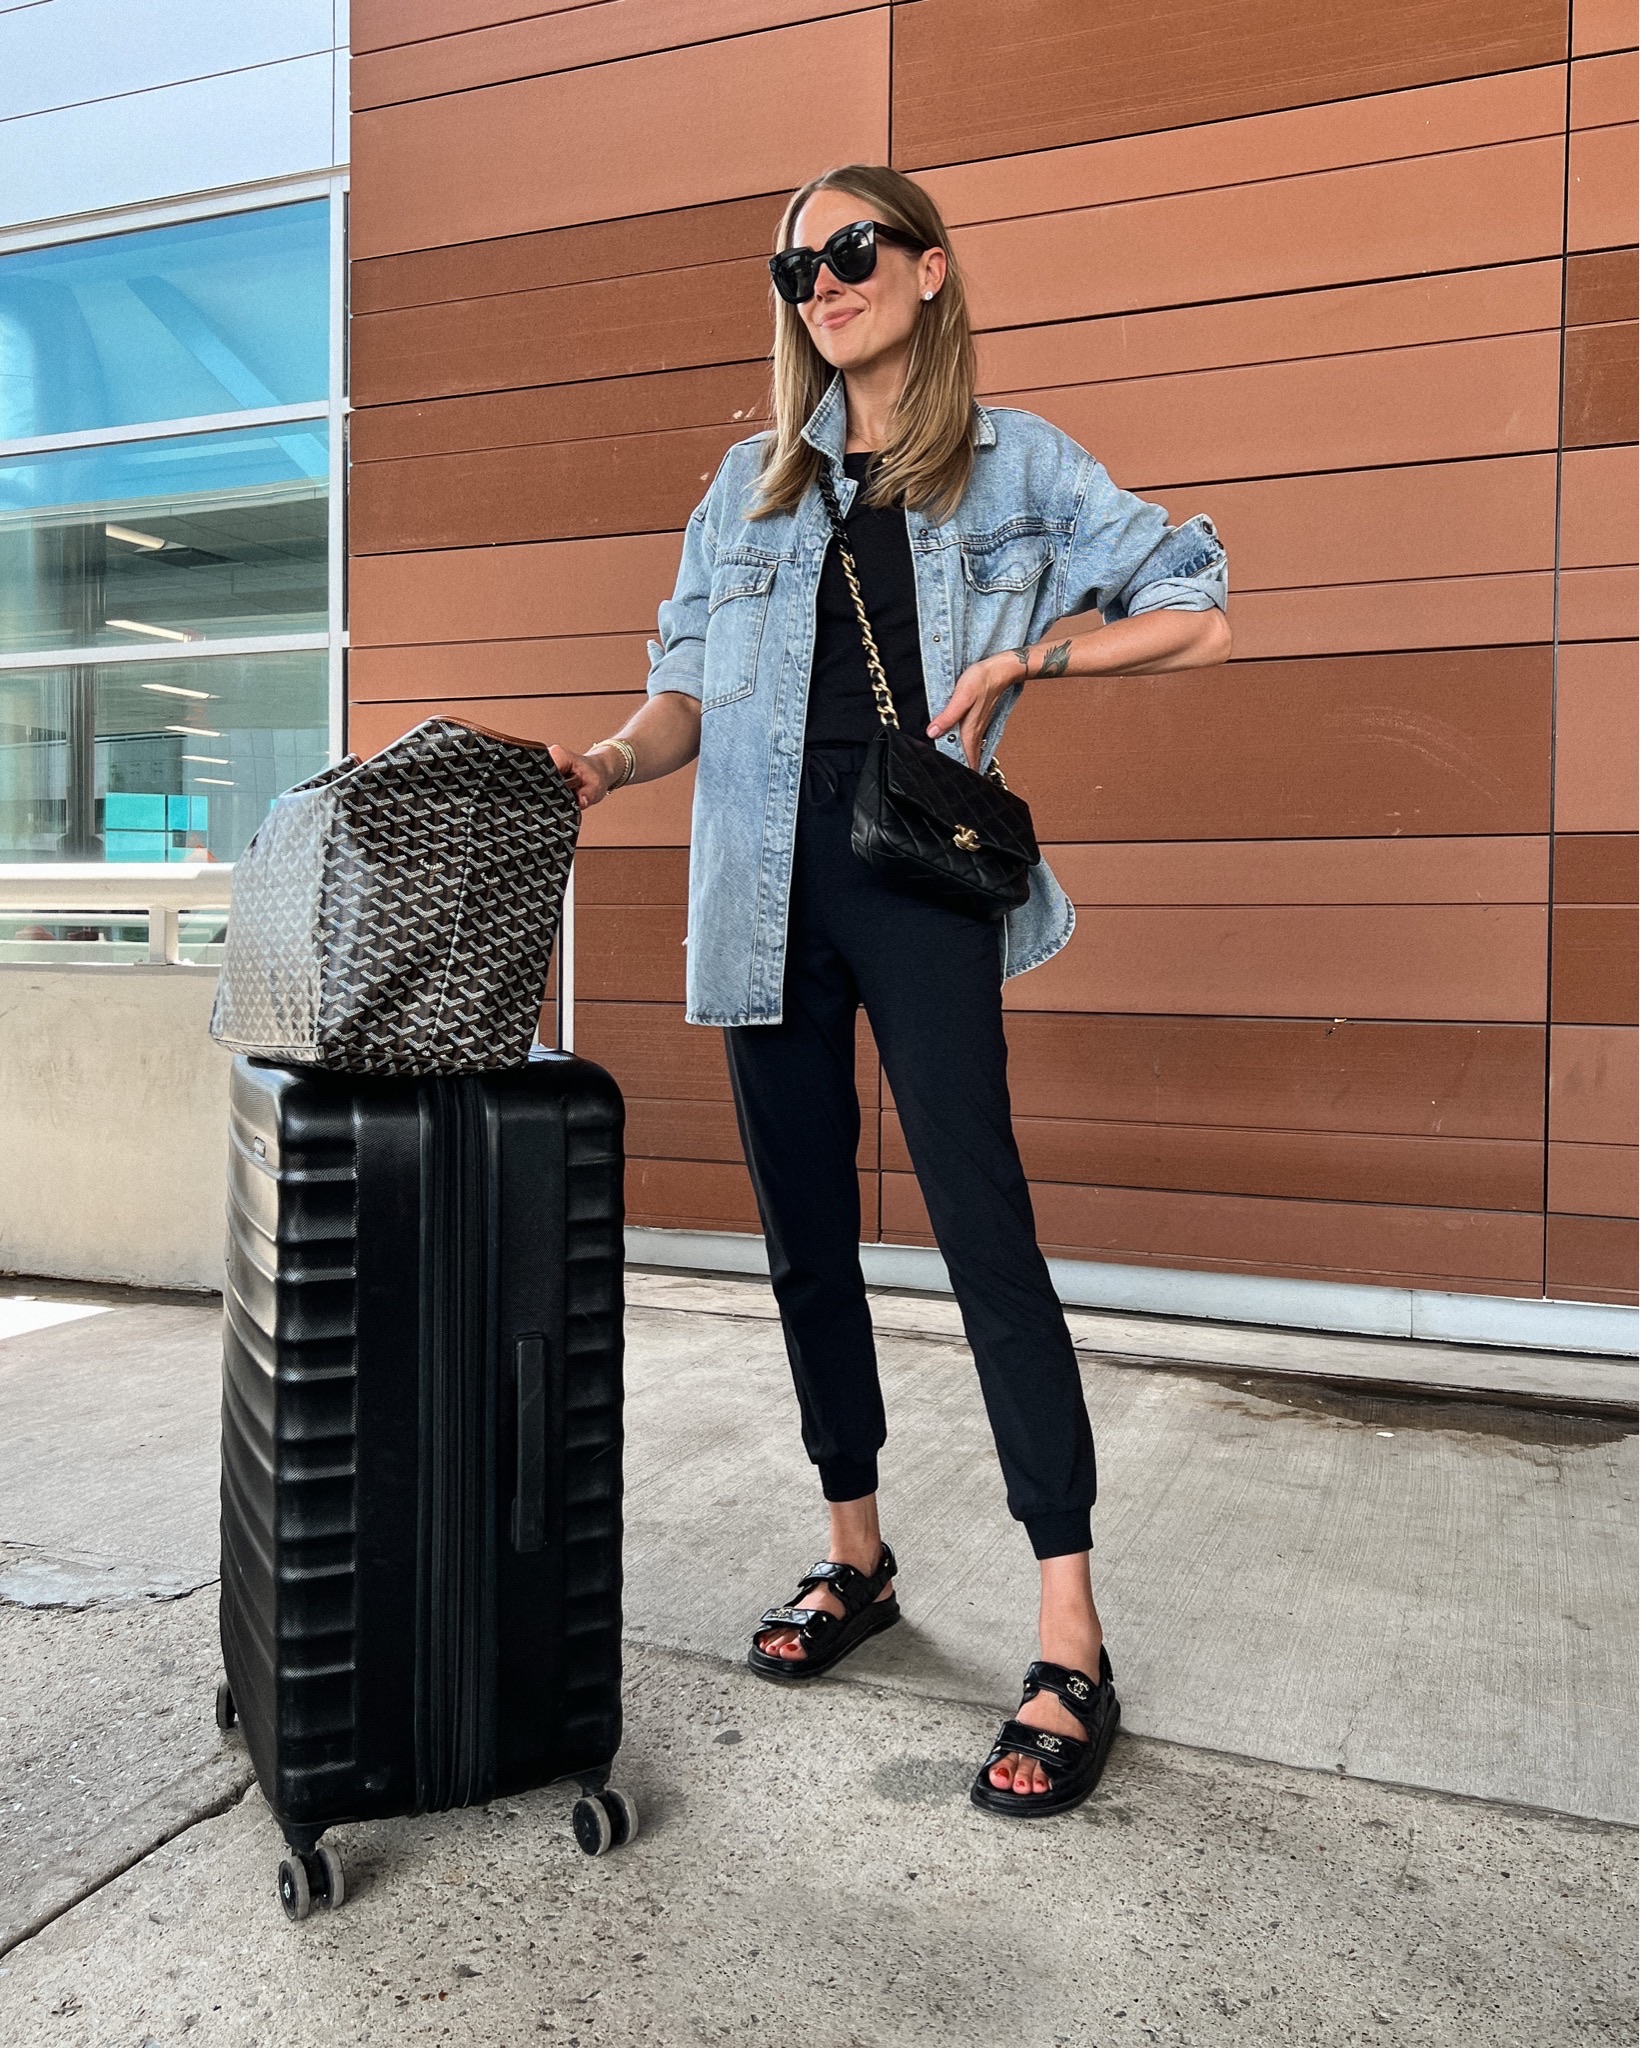 Airport Style, US travel and fashion